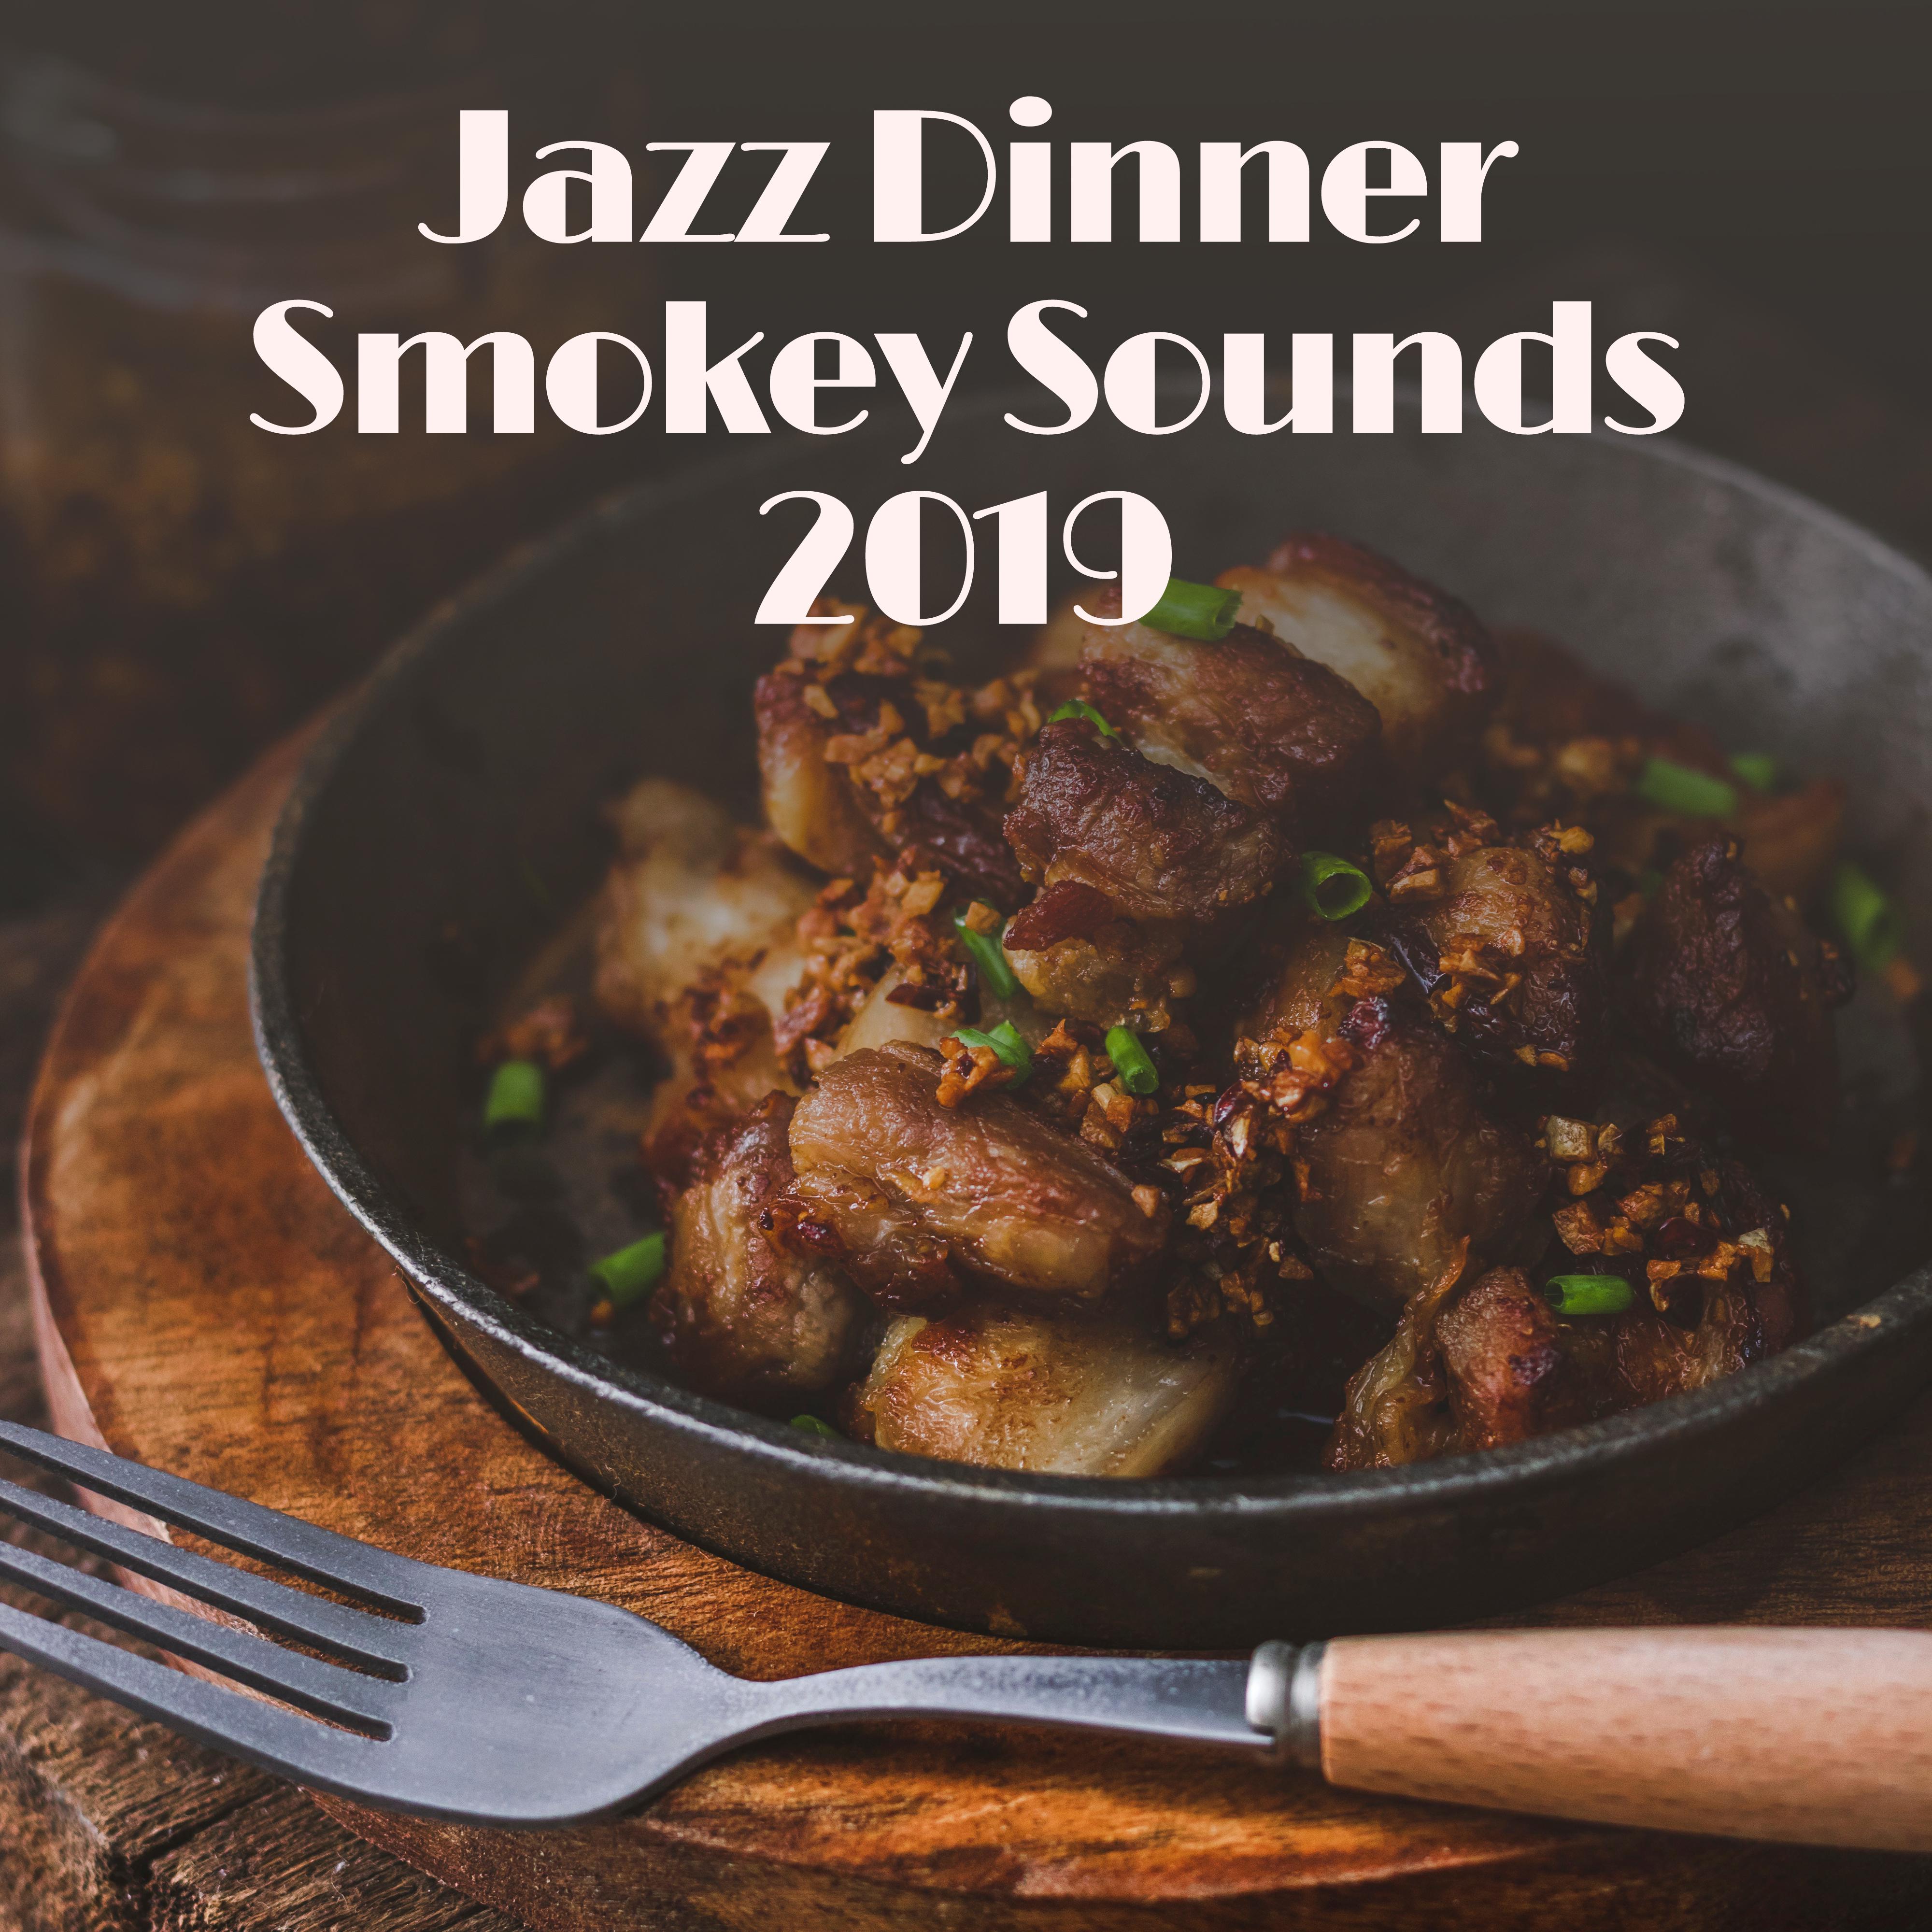 Jazz Dinner Smokey Sounds 2019: 15 Smooth Jazz Songs, Perfect Dinner Background Music, Sensual Melodies & Vintage Sounds of Instruments